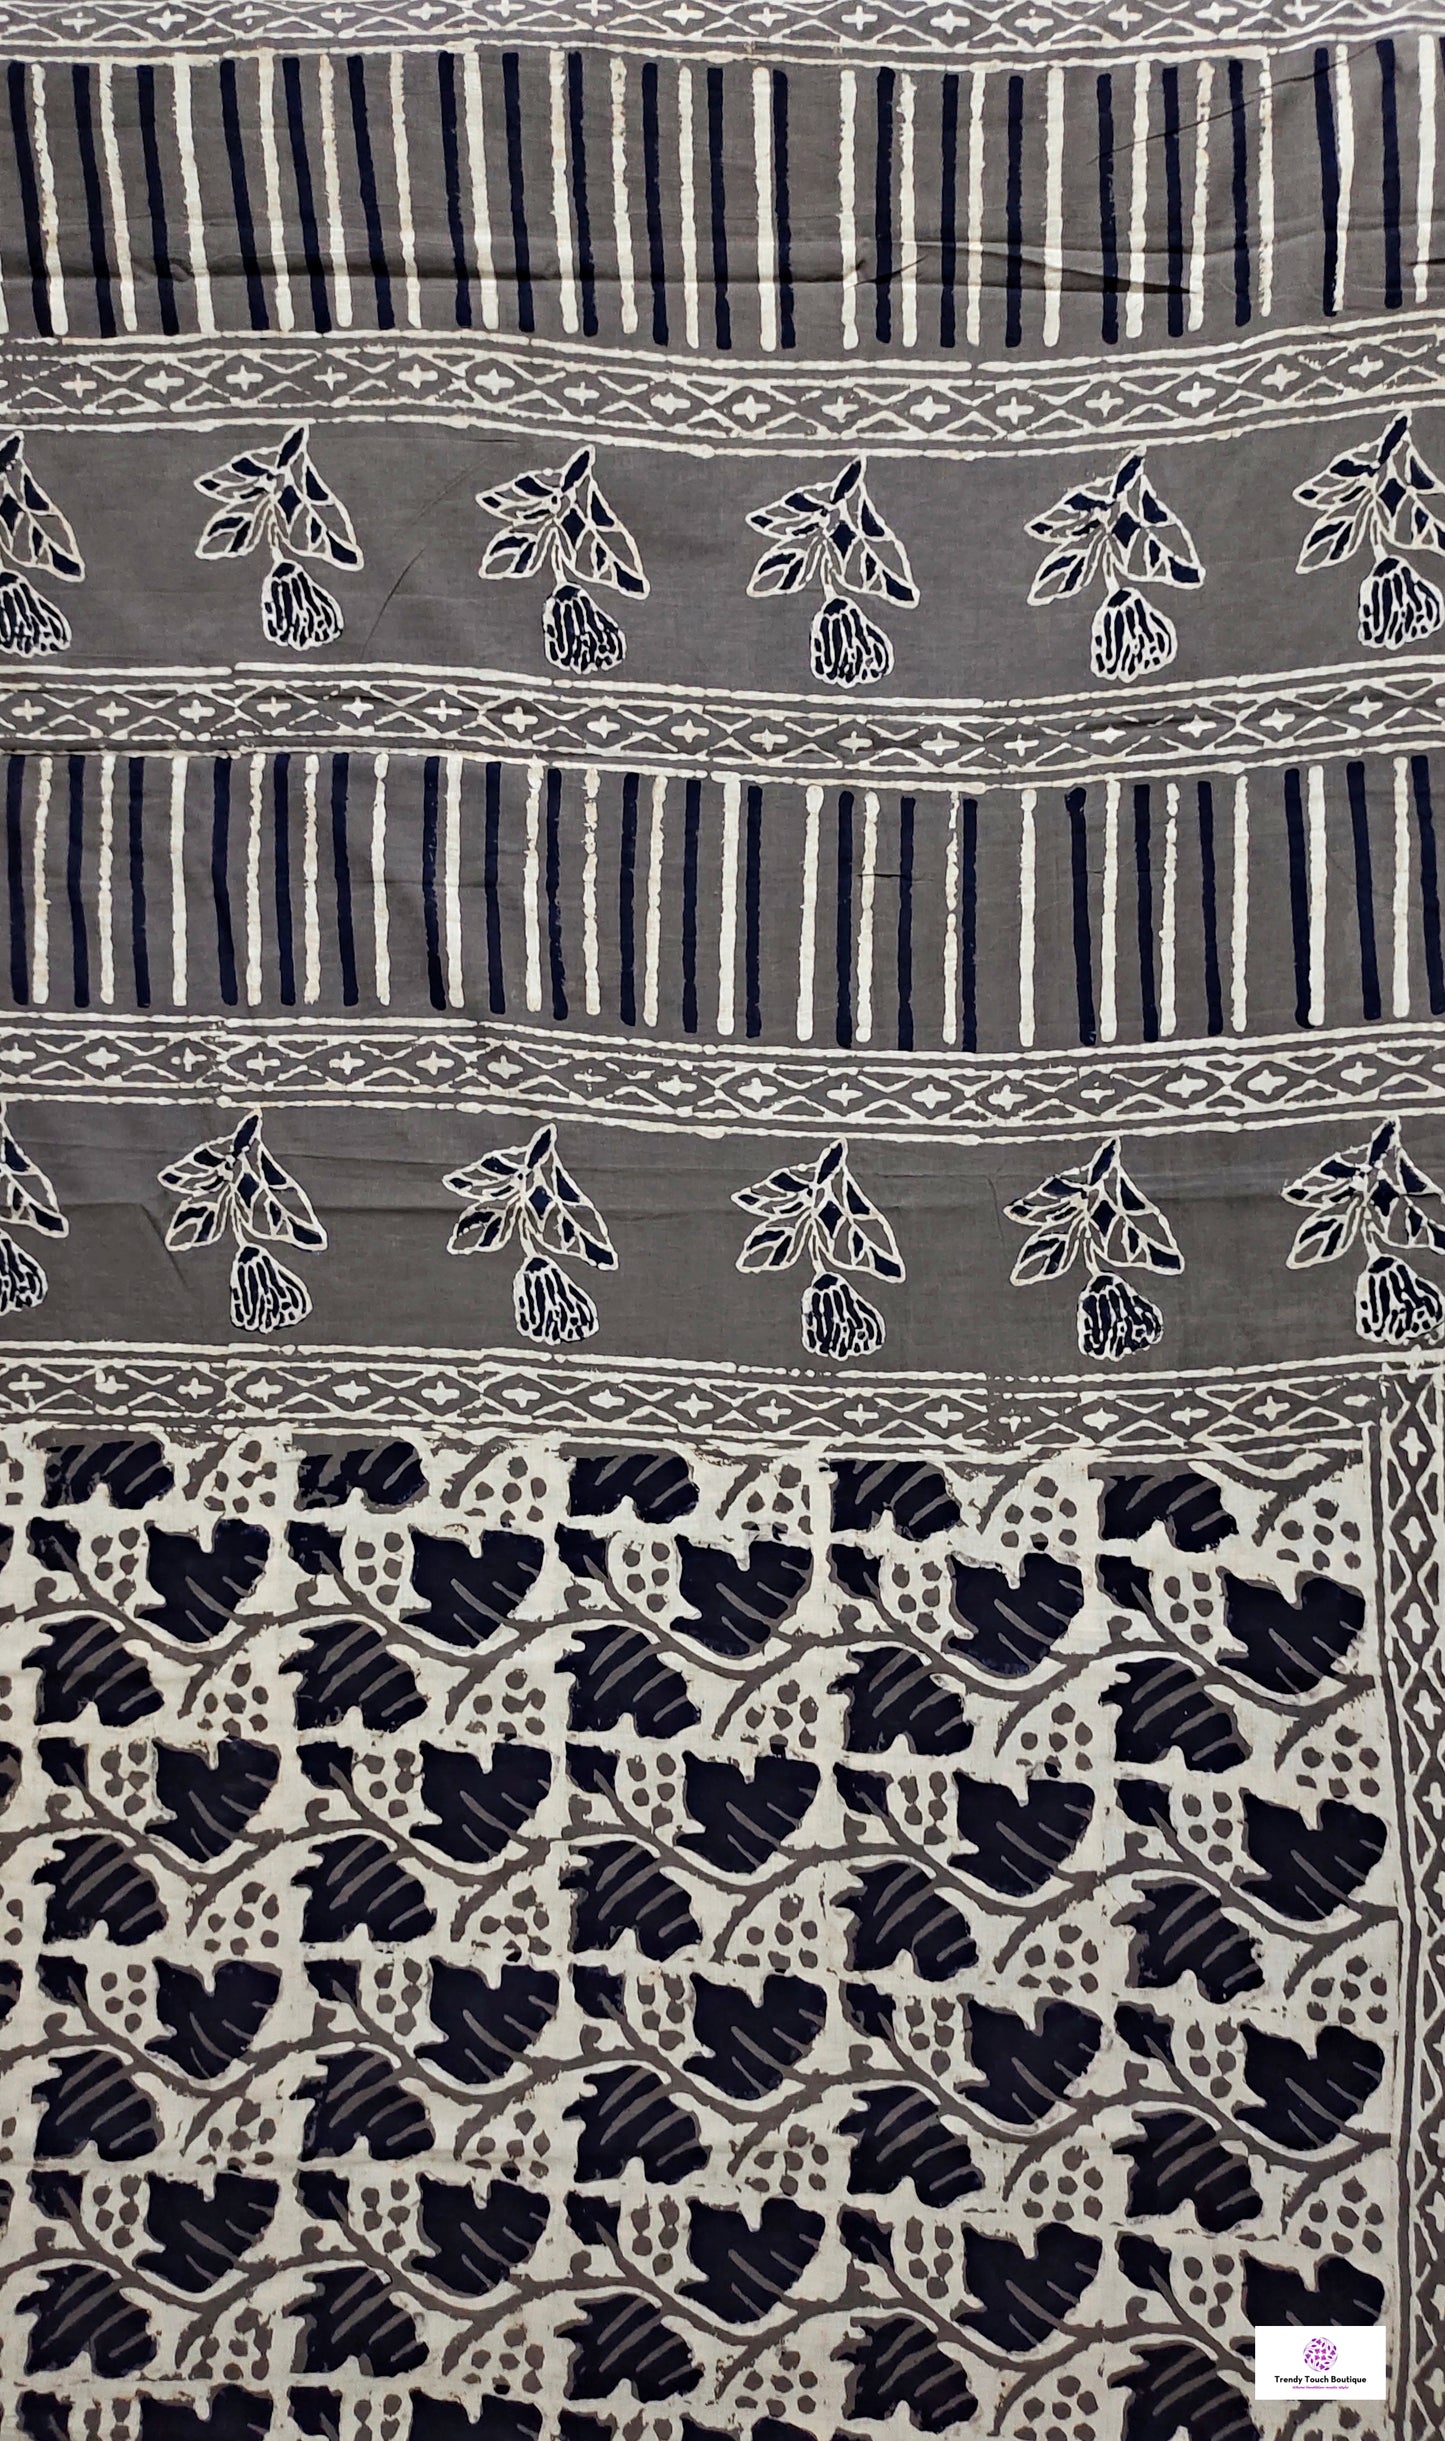 Black & Ash Grey Floral pattern Organic Handblock print in natural dye mul cotton saree office and casual styling best price best summer fabric with blouse piece